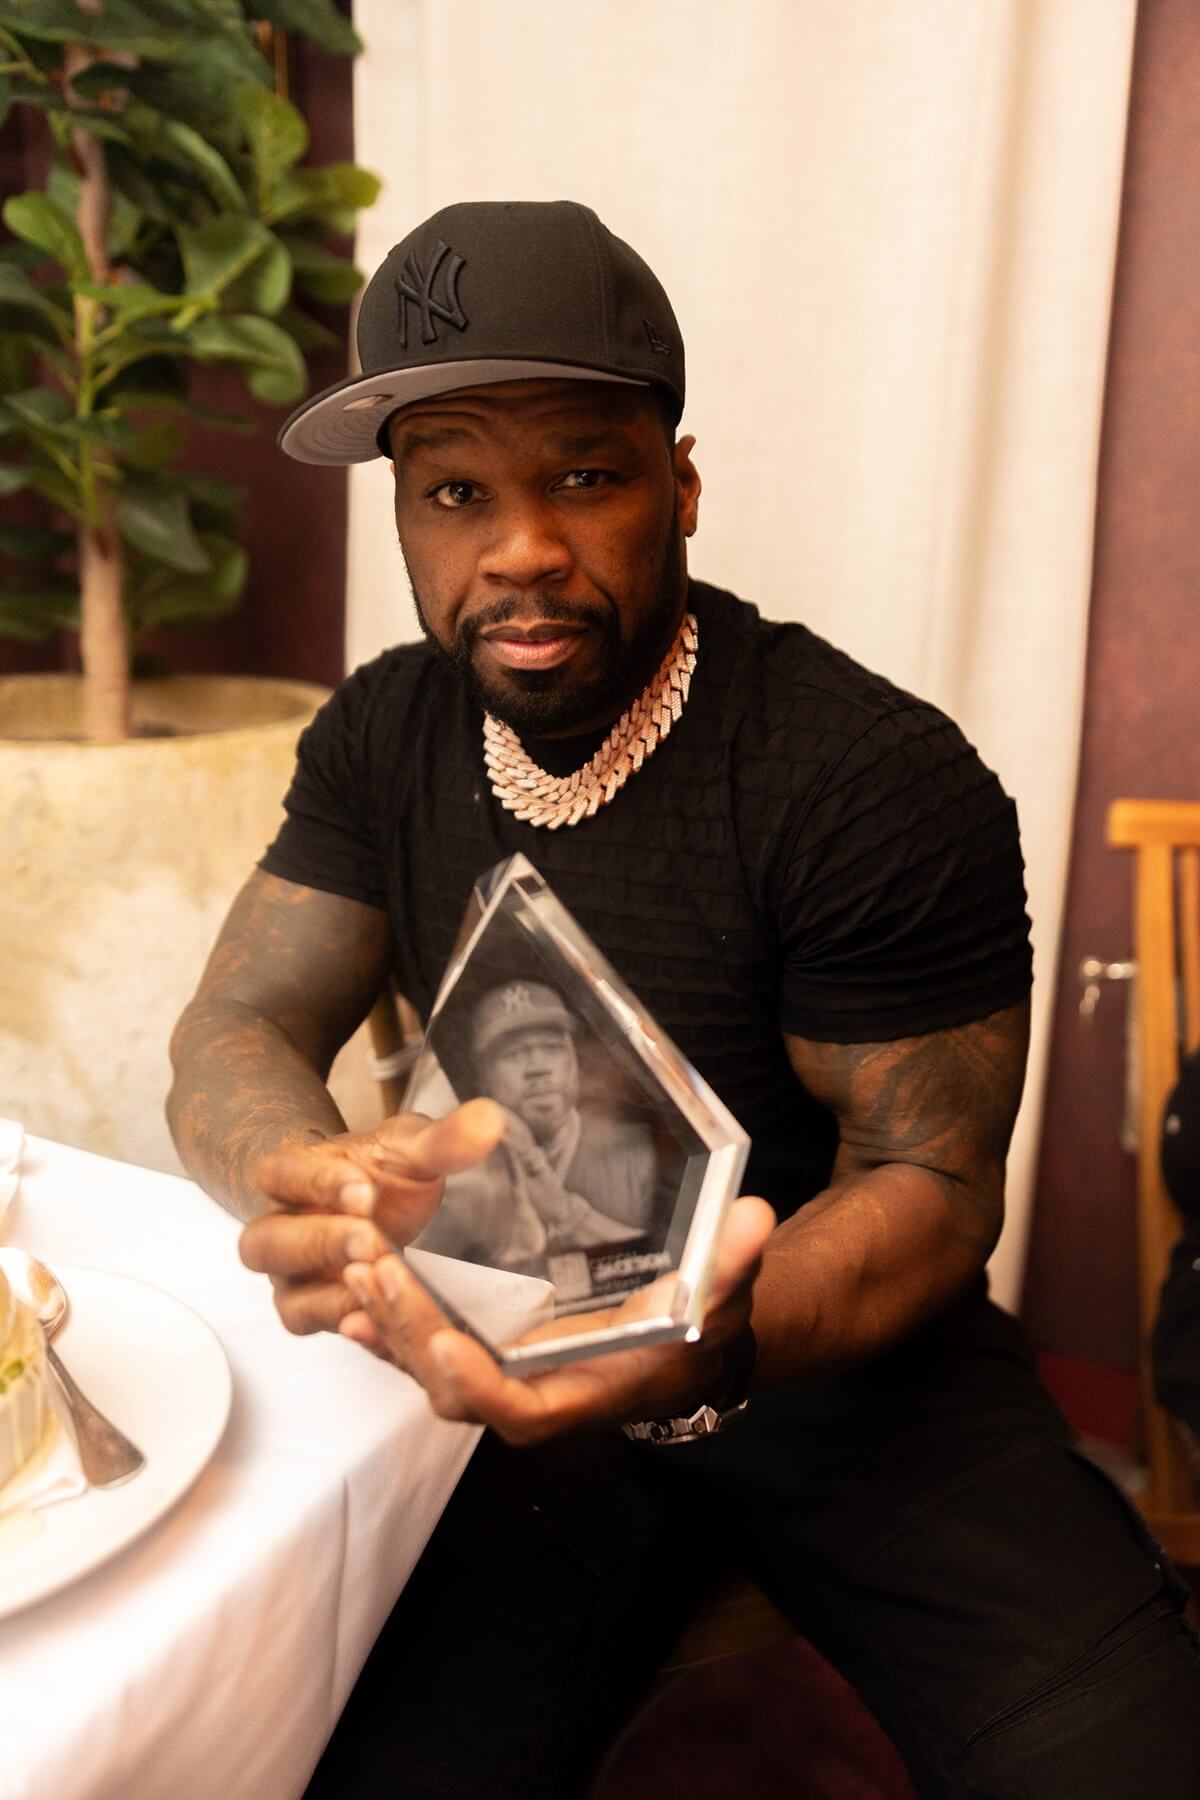 50 Cent sitting in a chair posing in a chair holding a glass object.